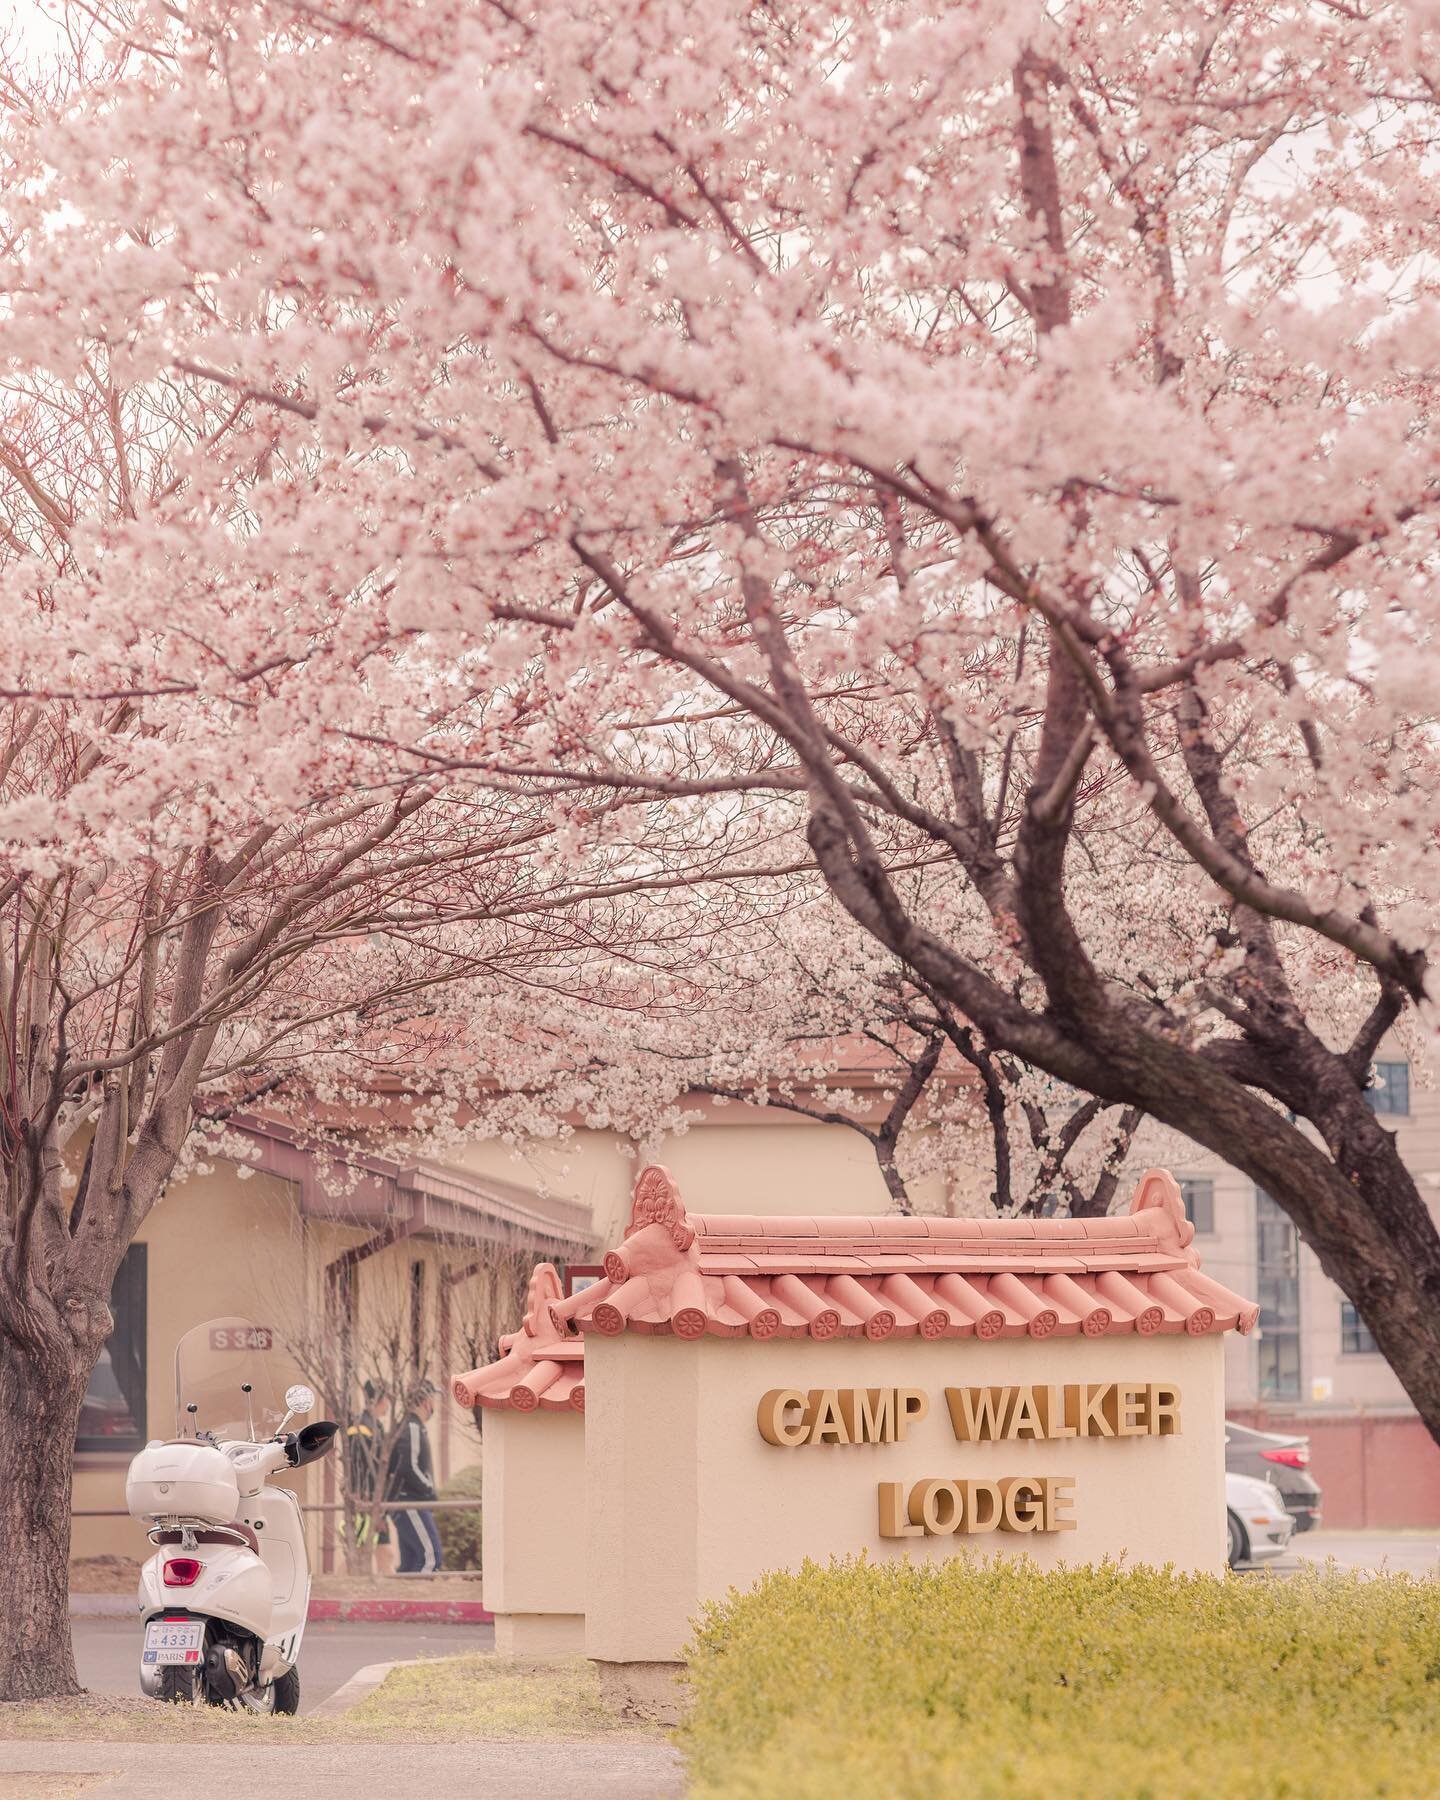 Camp Walker looked magical with all of its cherry blossoms this year! 🌸
.
Welcome to all of our newcomers that are soon to be PCSing into Area IV!! Korea is an amazing country and we are so glad to have you!